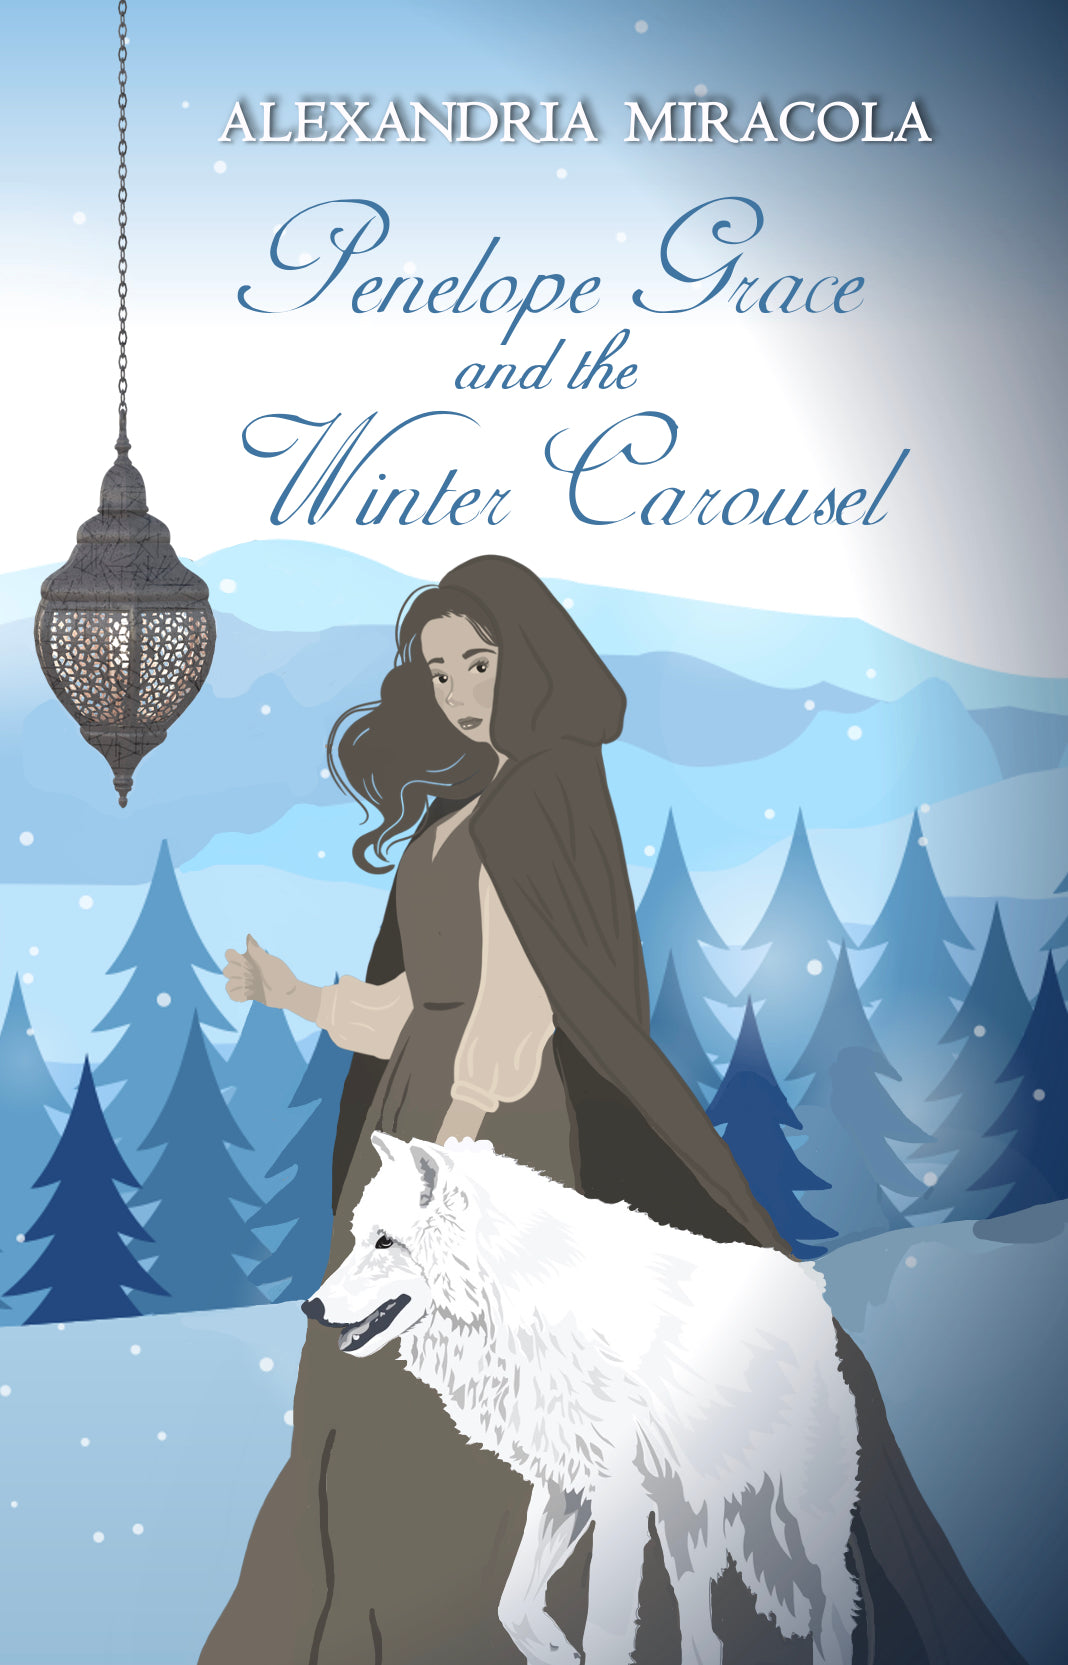 Penelope Grace and the Winter Carousel